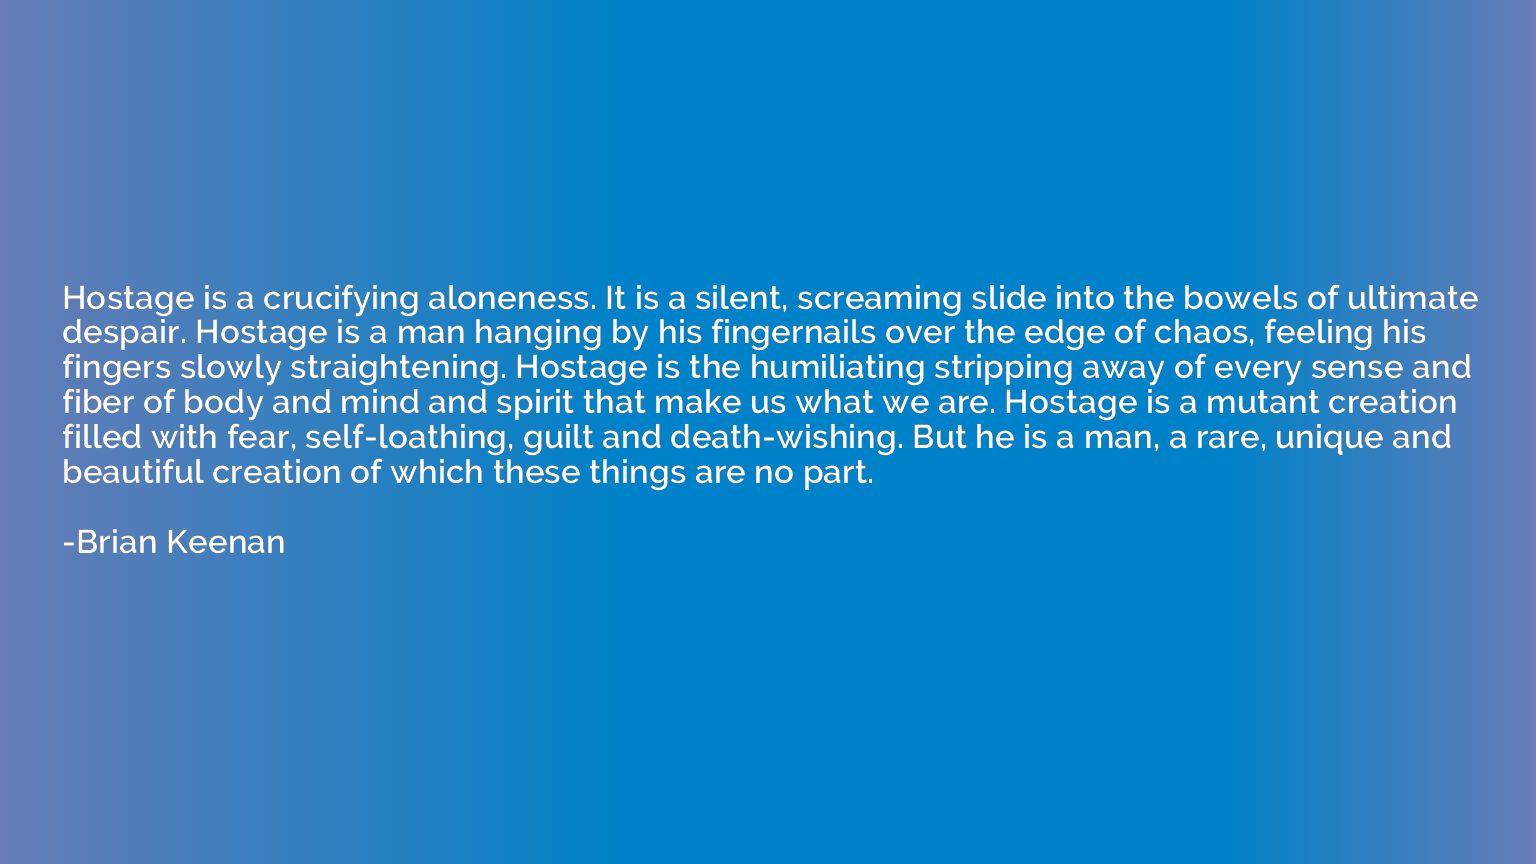 Hostage is a crucifying aloneness. It is a silent, screaming